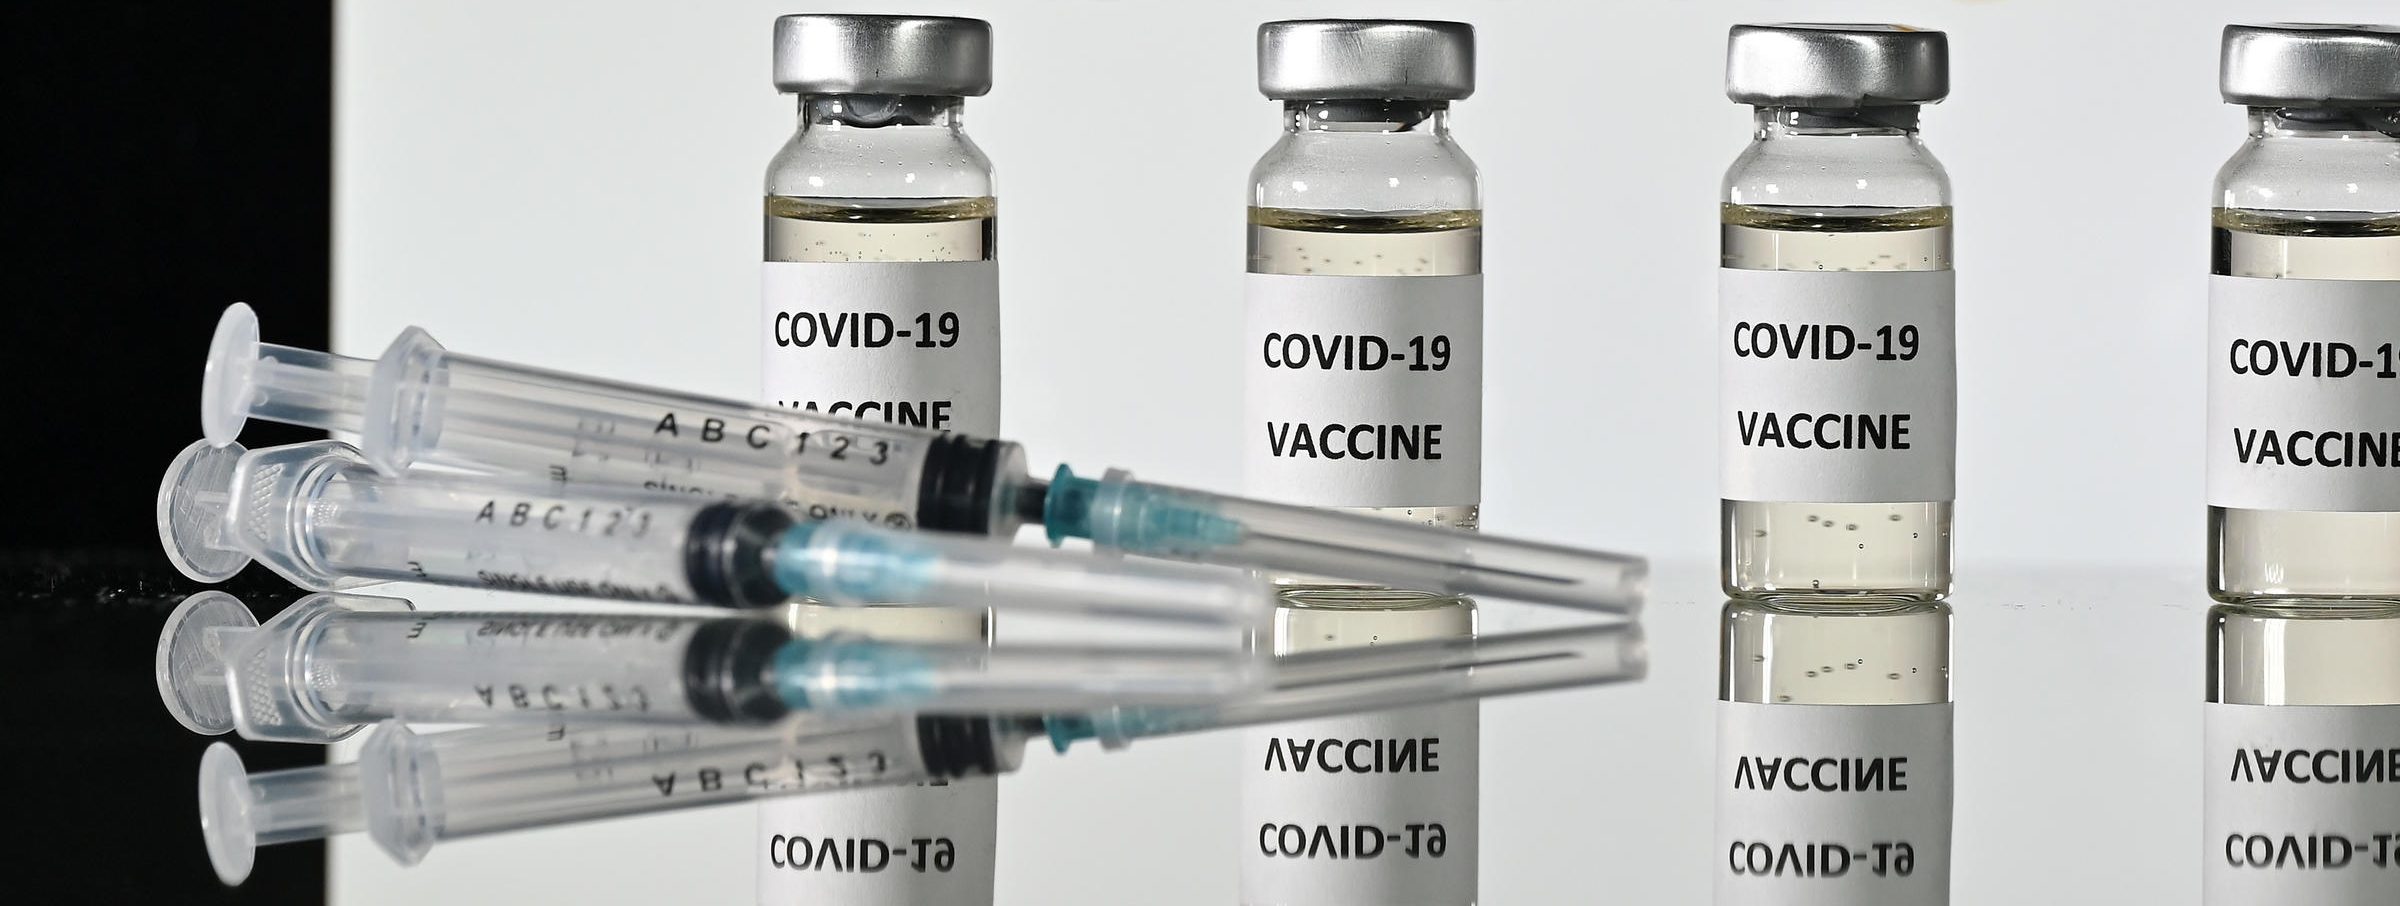 Montserrat’s COVID-19 Vaccination Programme To Begin in February